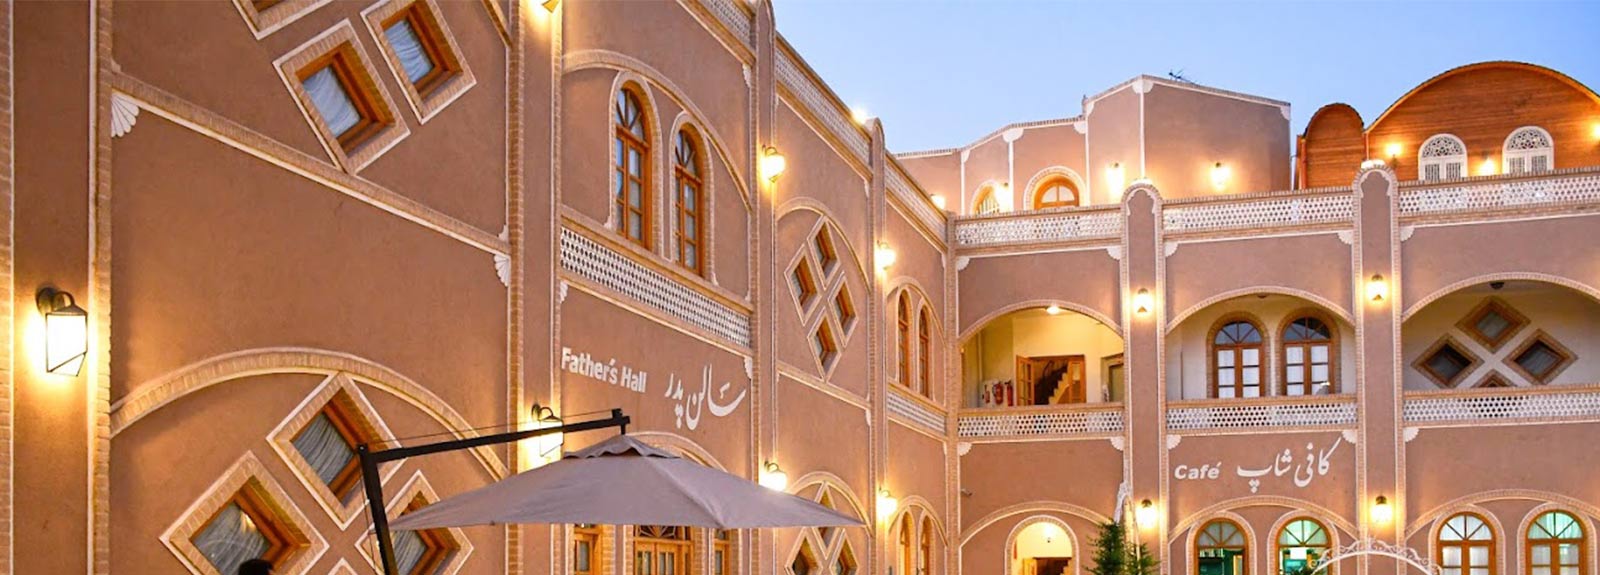 3 Best hotels in Yazd: Where to stay